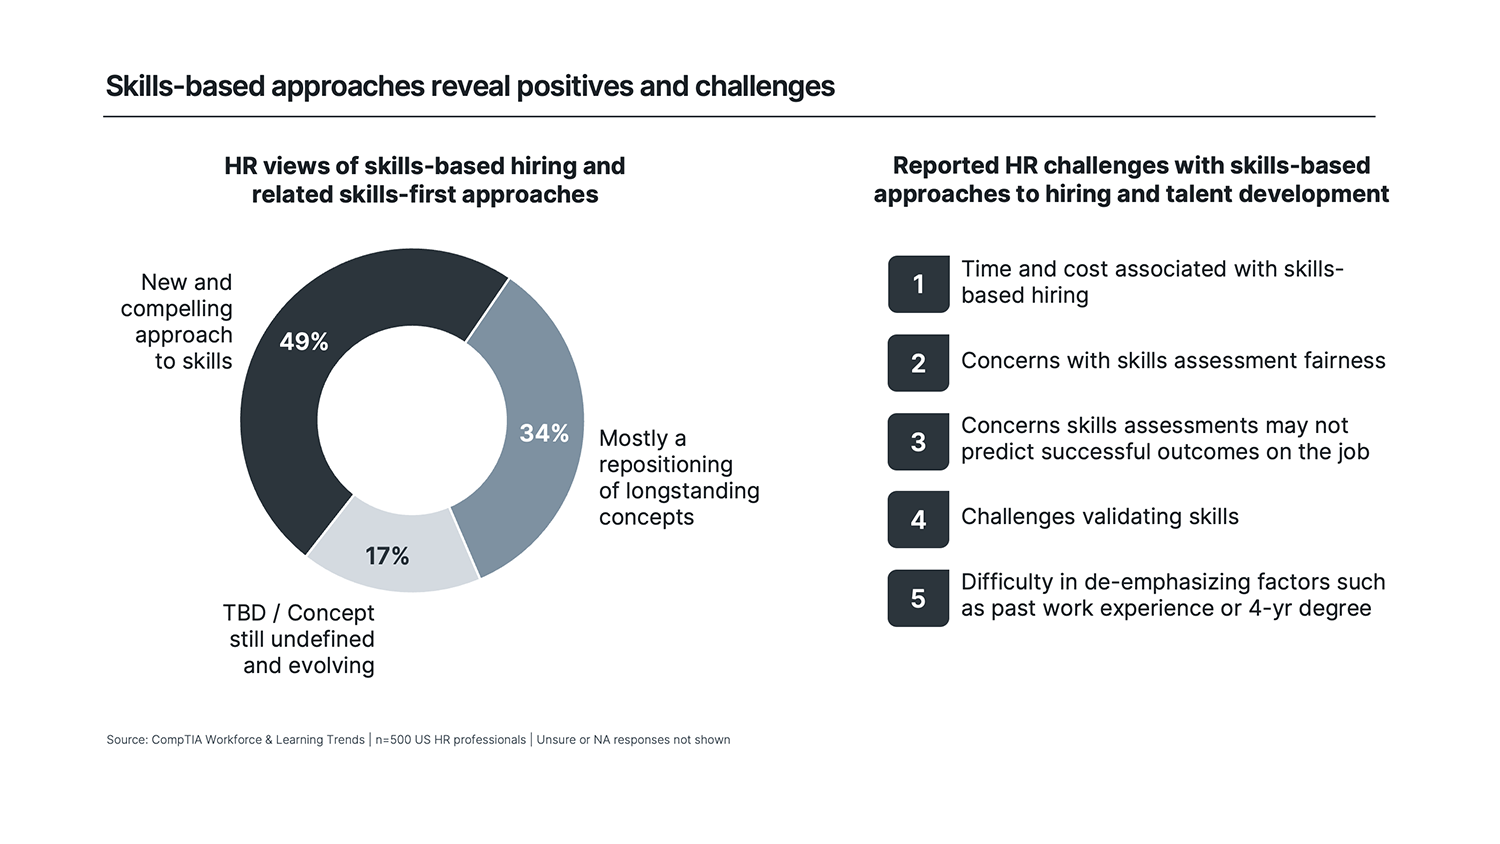 Skills-Based Approaches Reveal Positives and Challenges